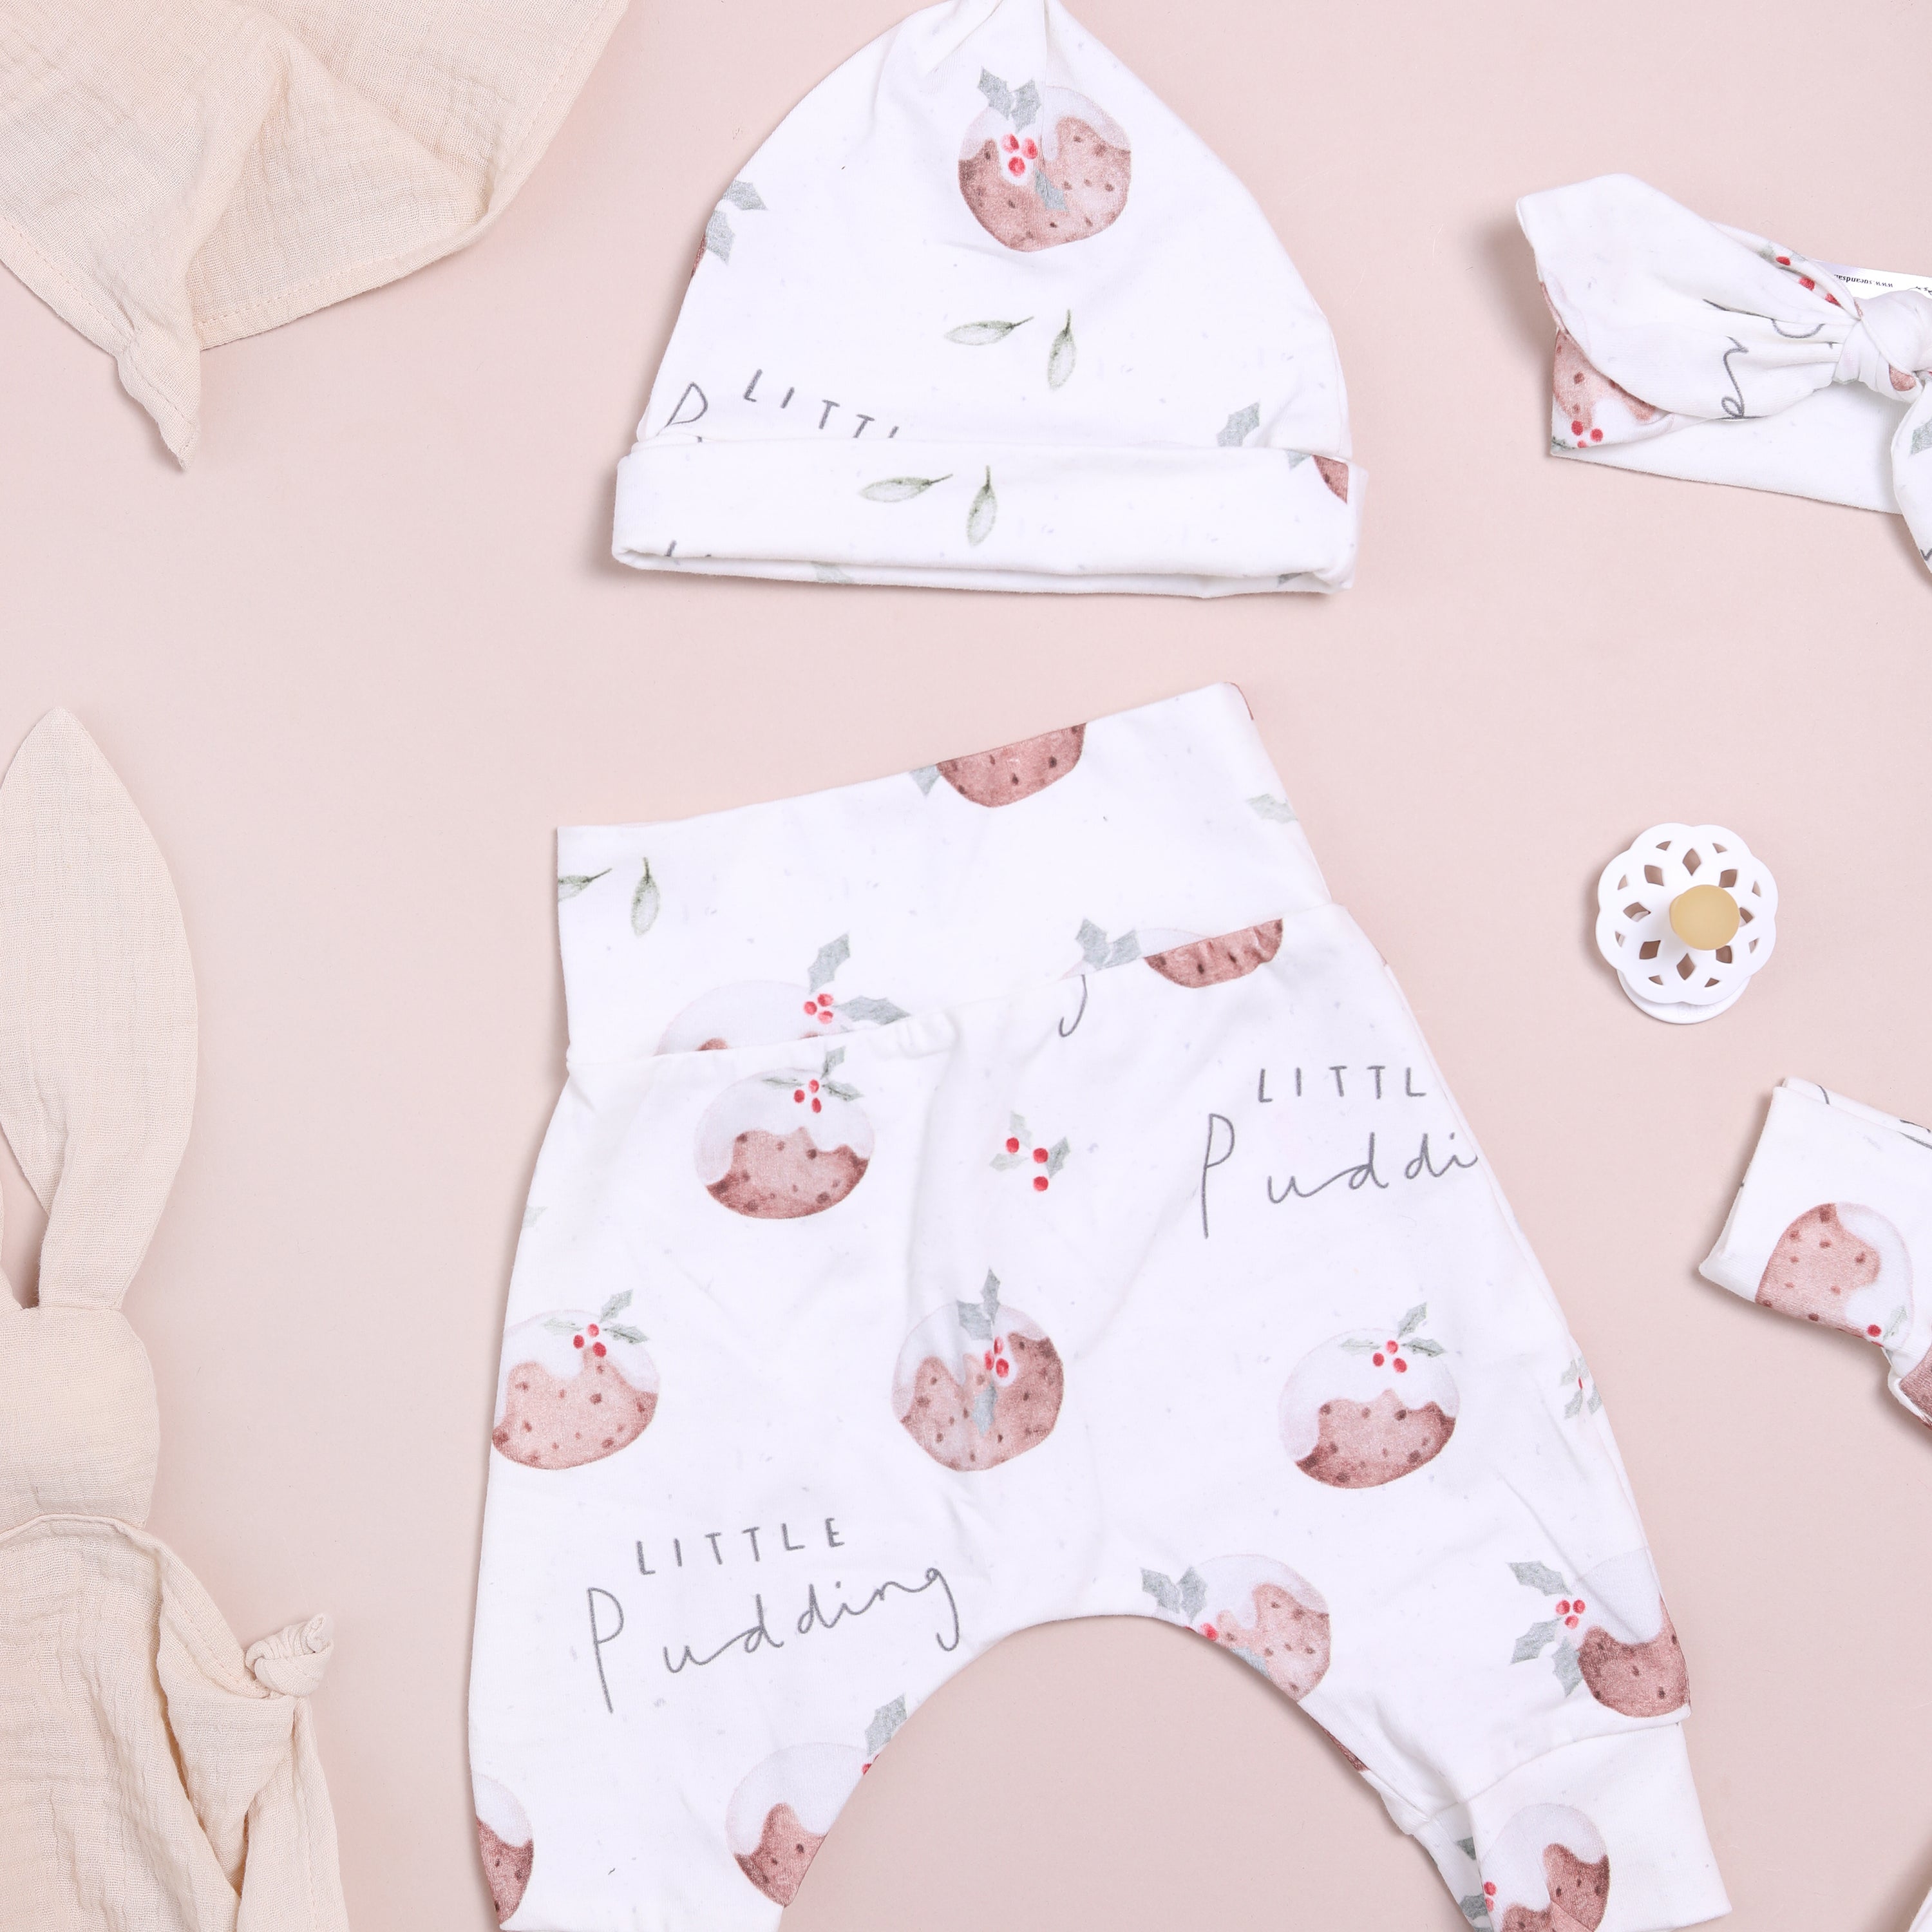 Little pudding baby leggings and accessories (Organic) Sue and Samuel